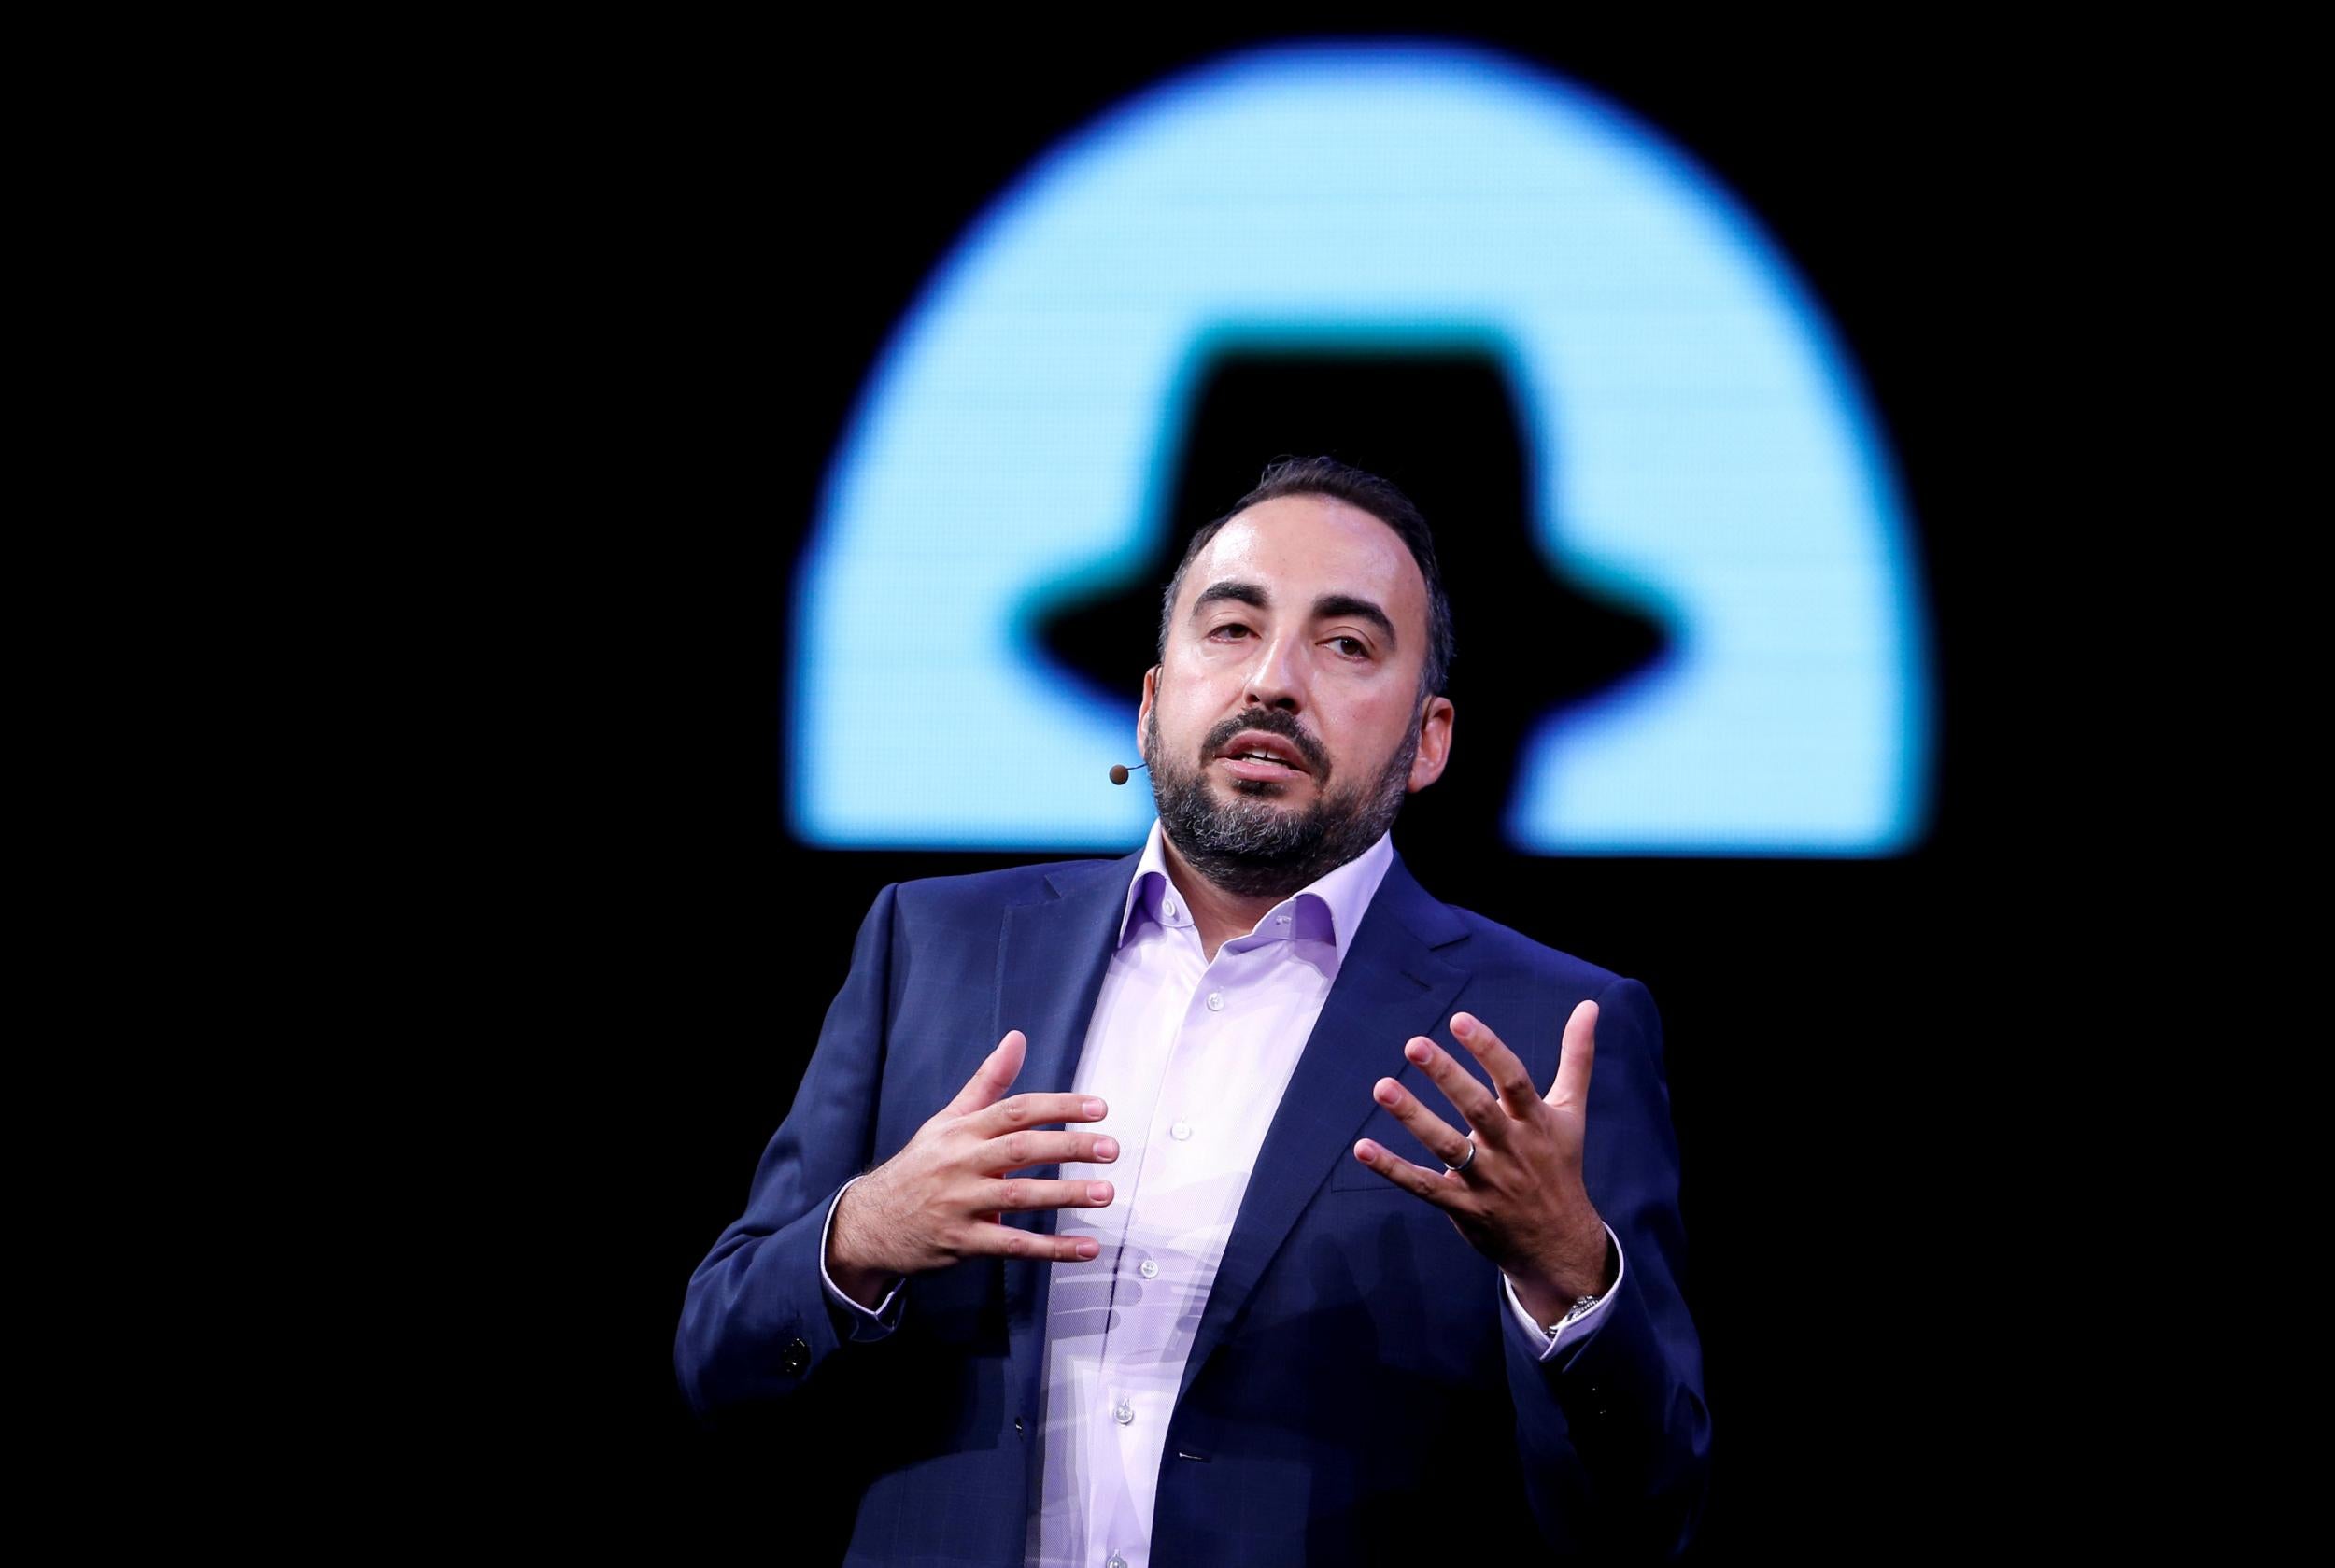 Former Facebook Chief Security Officer Alex Stamos gives a keynote address during the Black Hat information security conference in Las Vegas, Nevada, U.S. July 26, 2017